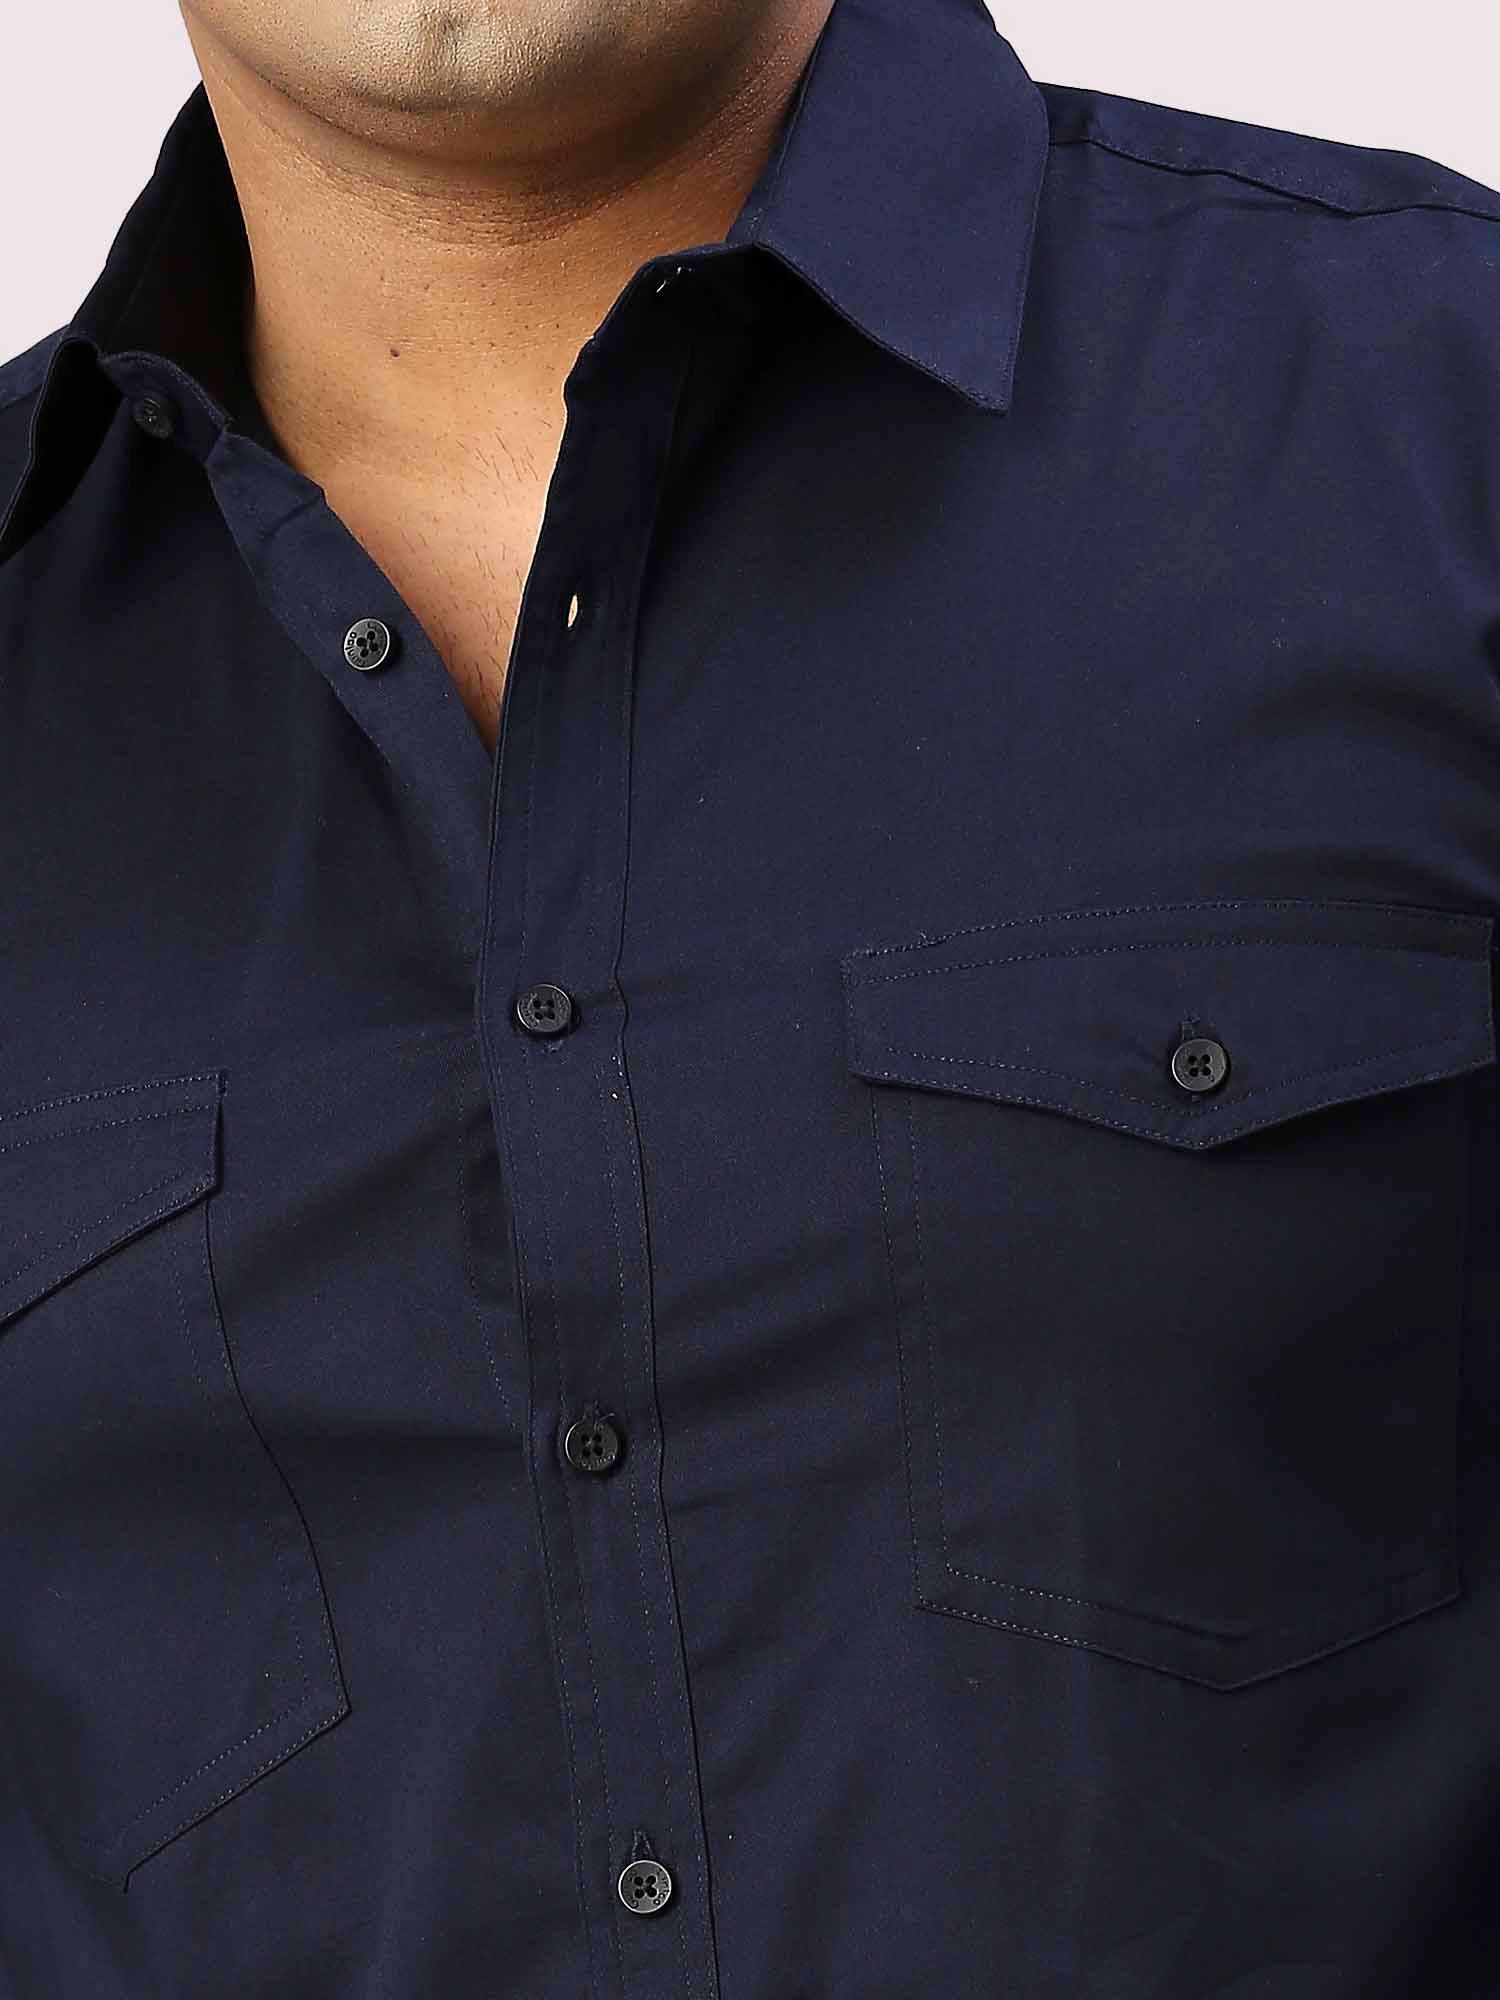 Navy Blue Solid Pure Cotton Double Pocket Full Sleeve Shirt Men's Plus Size - Guniaa Fashions